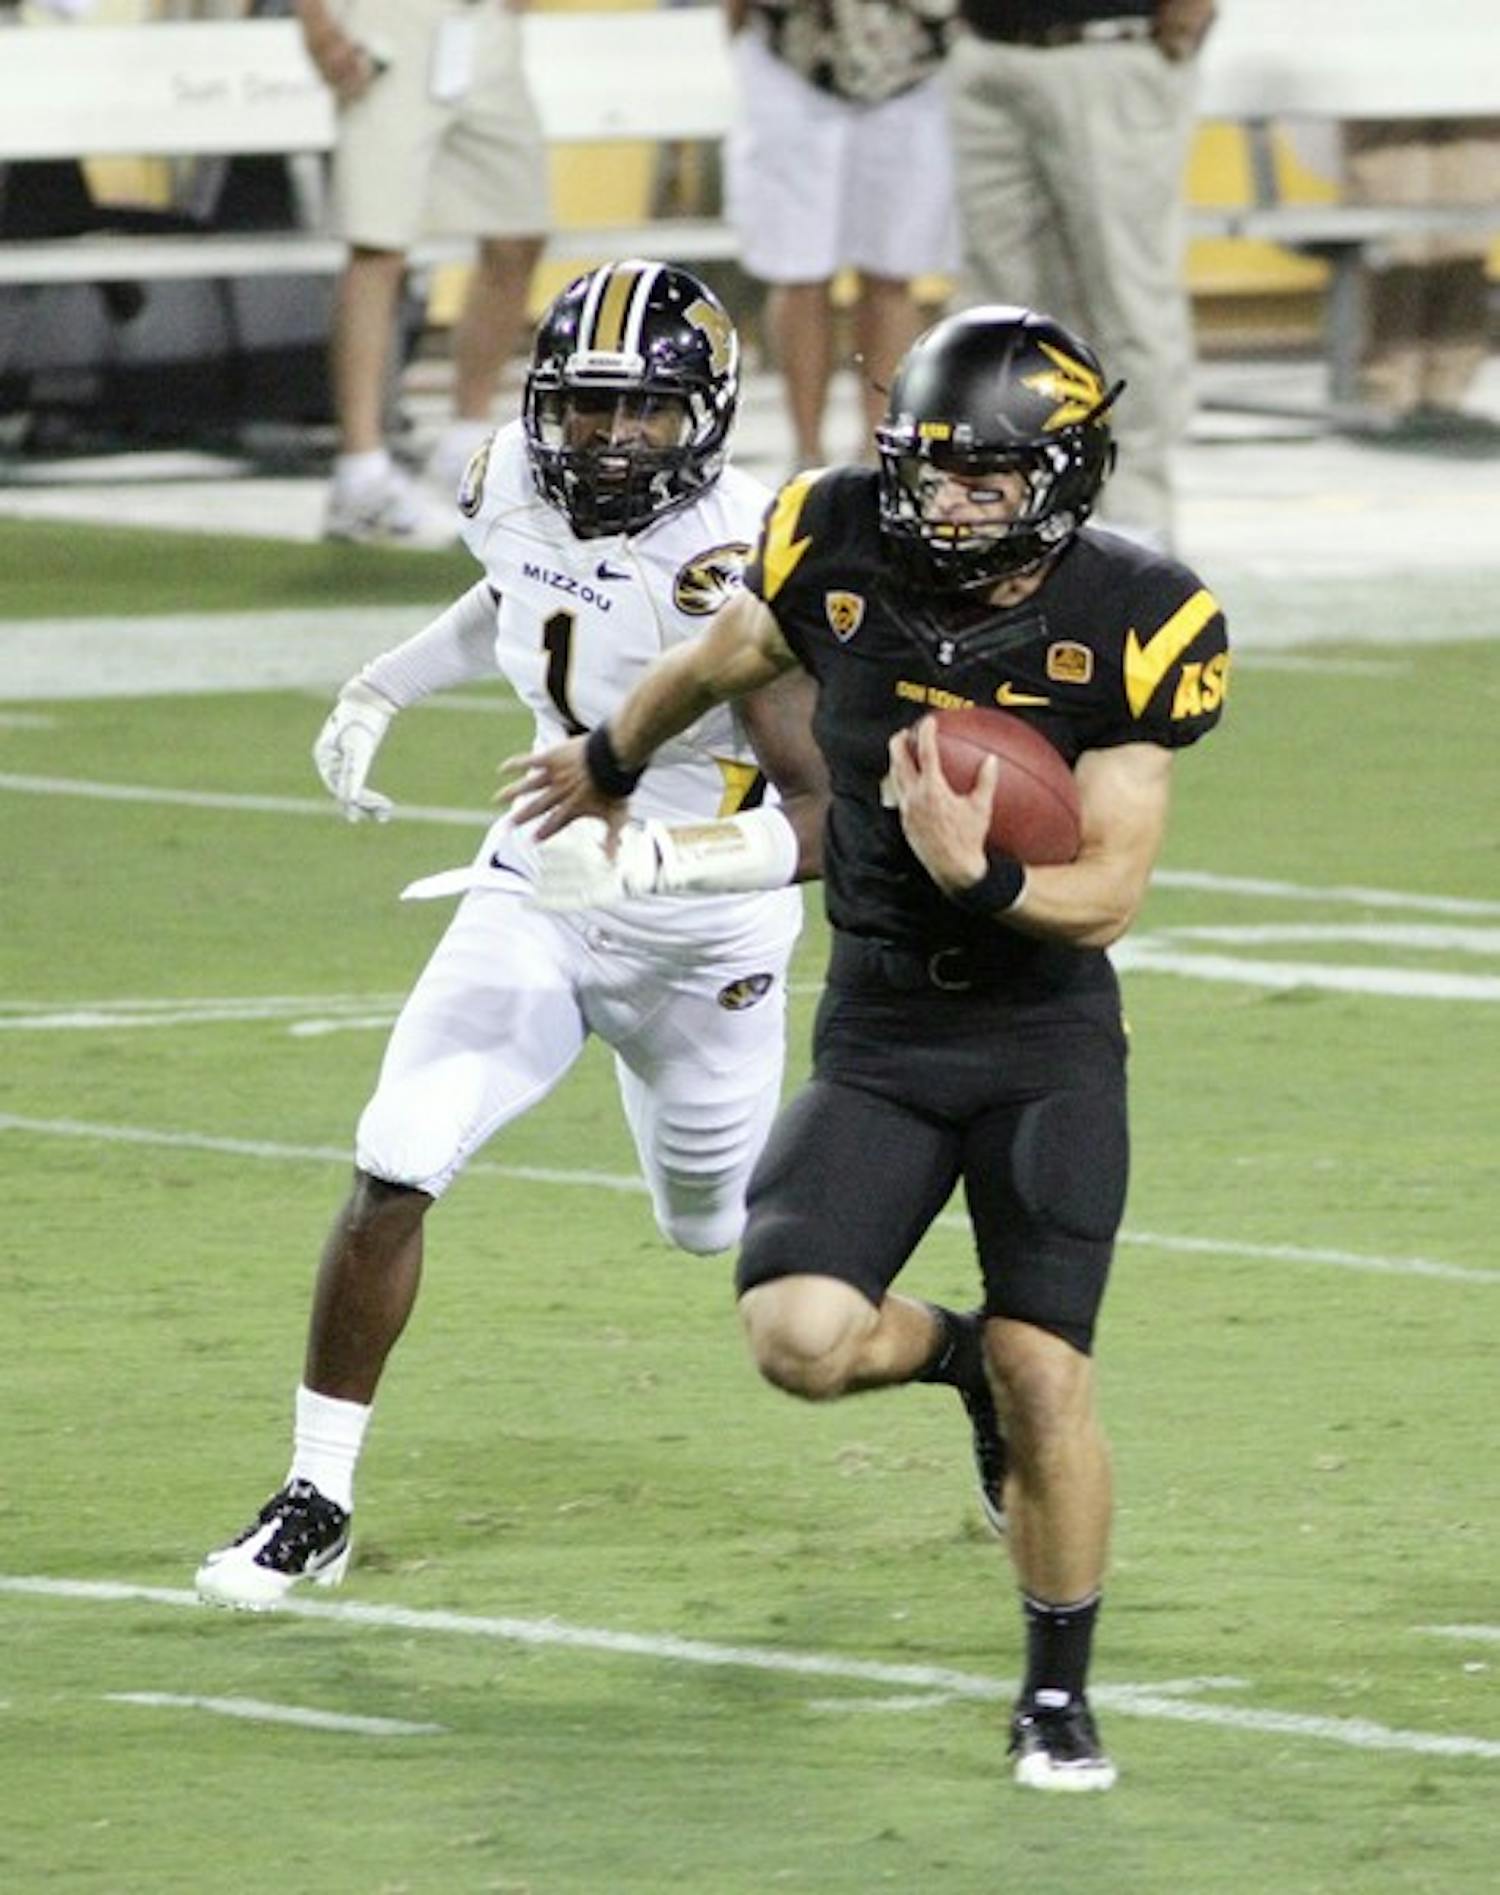 BREAKING FREE: ASU senior wide receiver Aaron Pflugrad carries the ball for a touchdown while Missouri redshirt junior defensive back Kip Edwards gives chase during Friday’s 37-30 overtime win over the Tigers. (Photo by Beth Easterbrook)